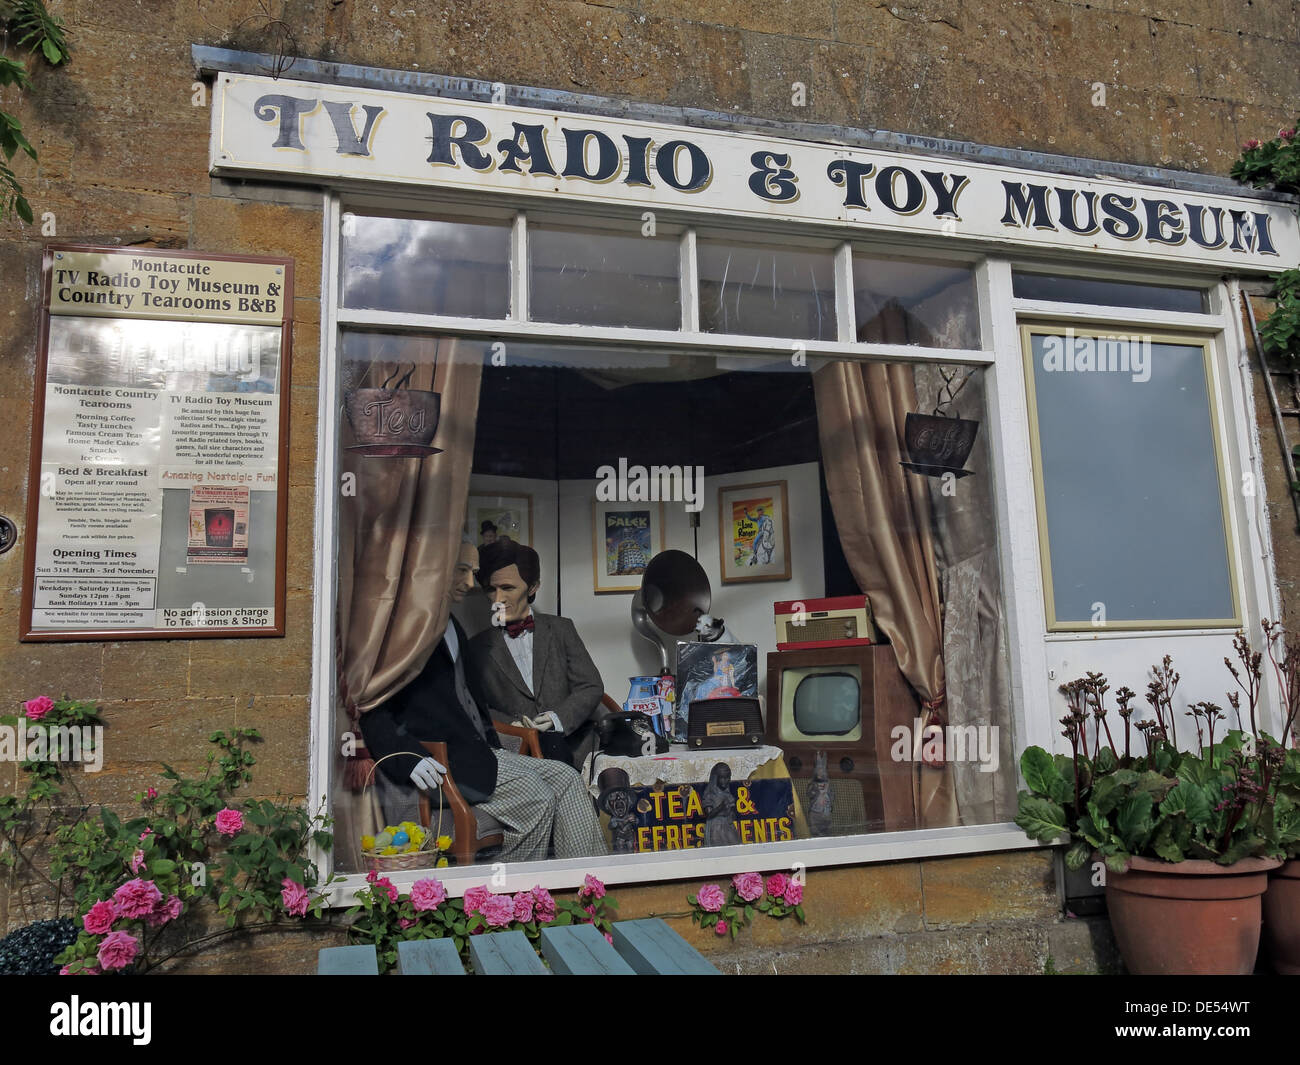 The TV, radio, & Toy Museum, 1, South Street, Montecute Village, sud du Somerset, Angleterre, Royaume-Uni, TA15 6xD Banque D'Images